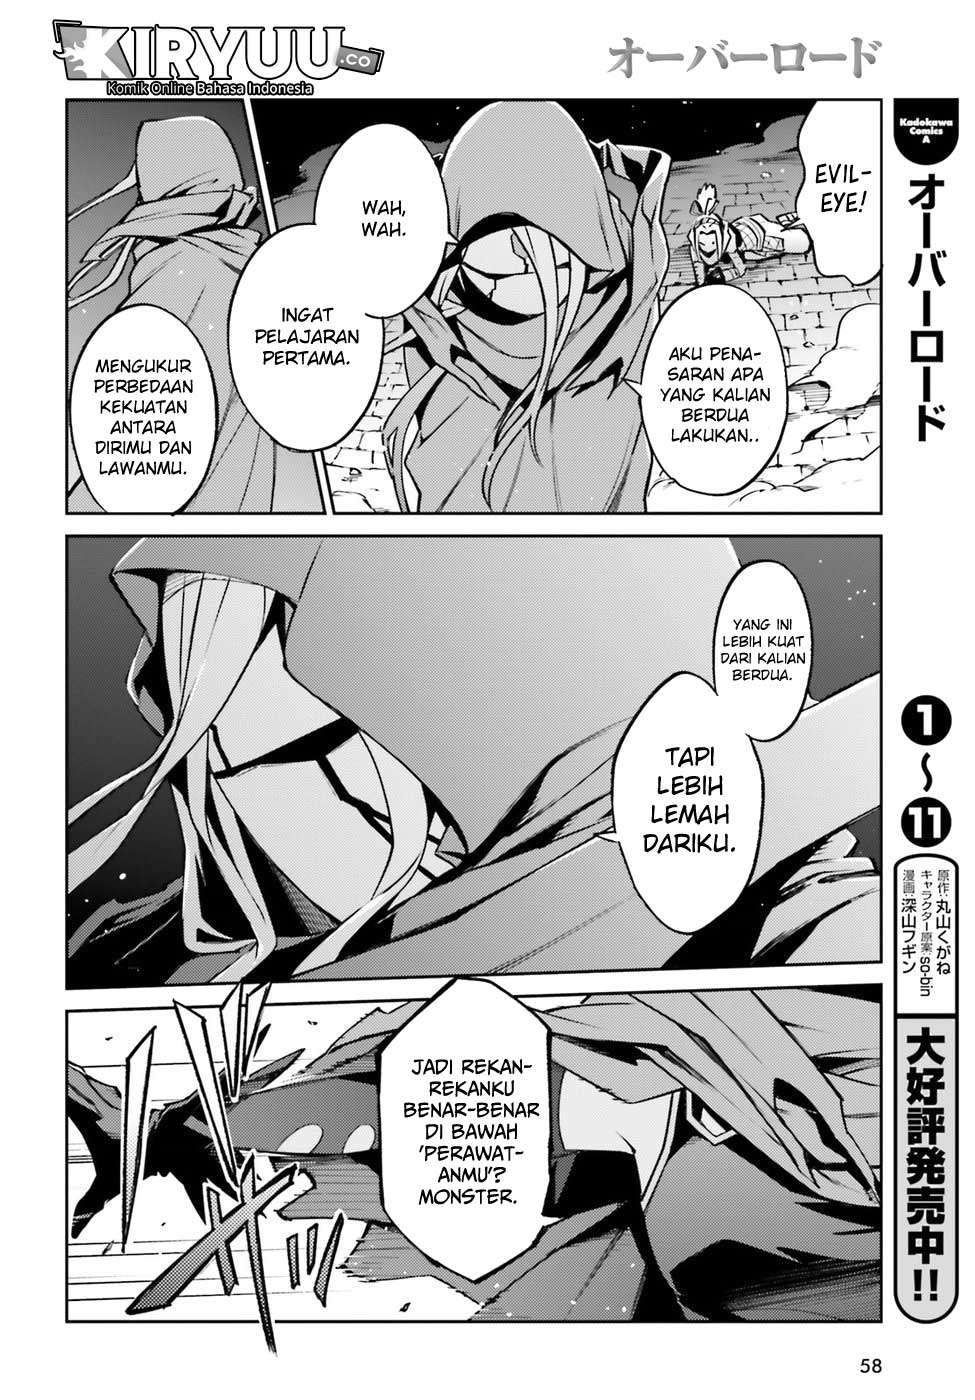 Overlord Chapter 45 27